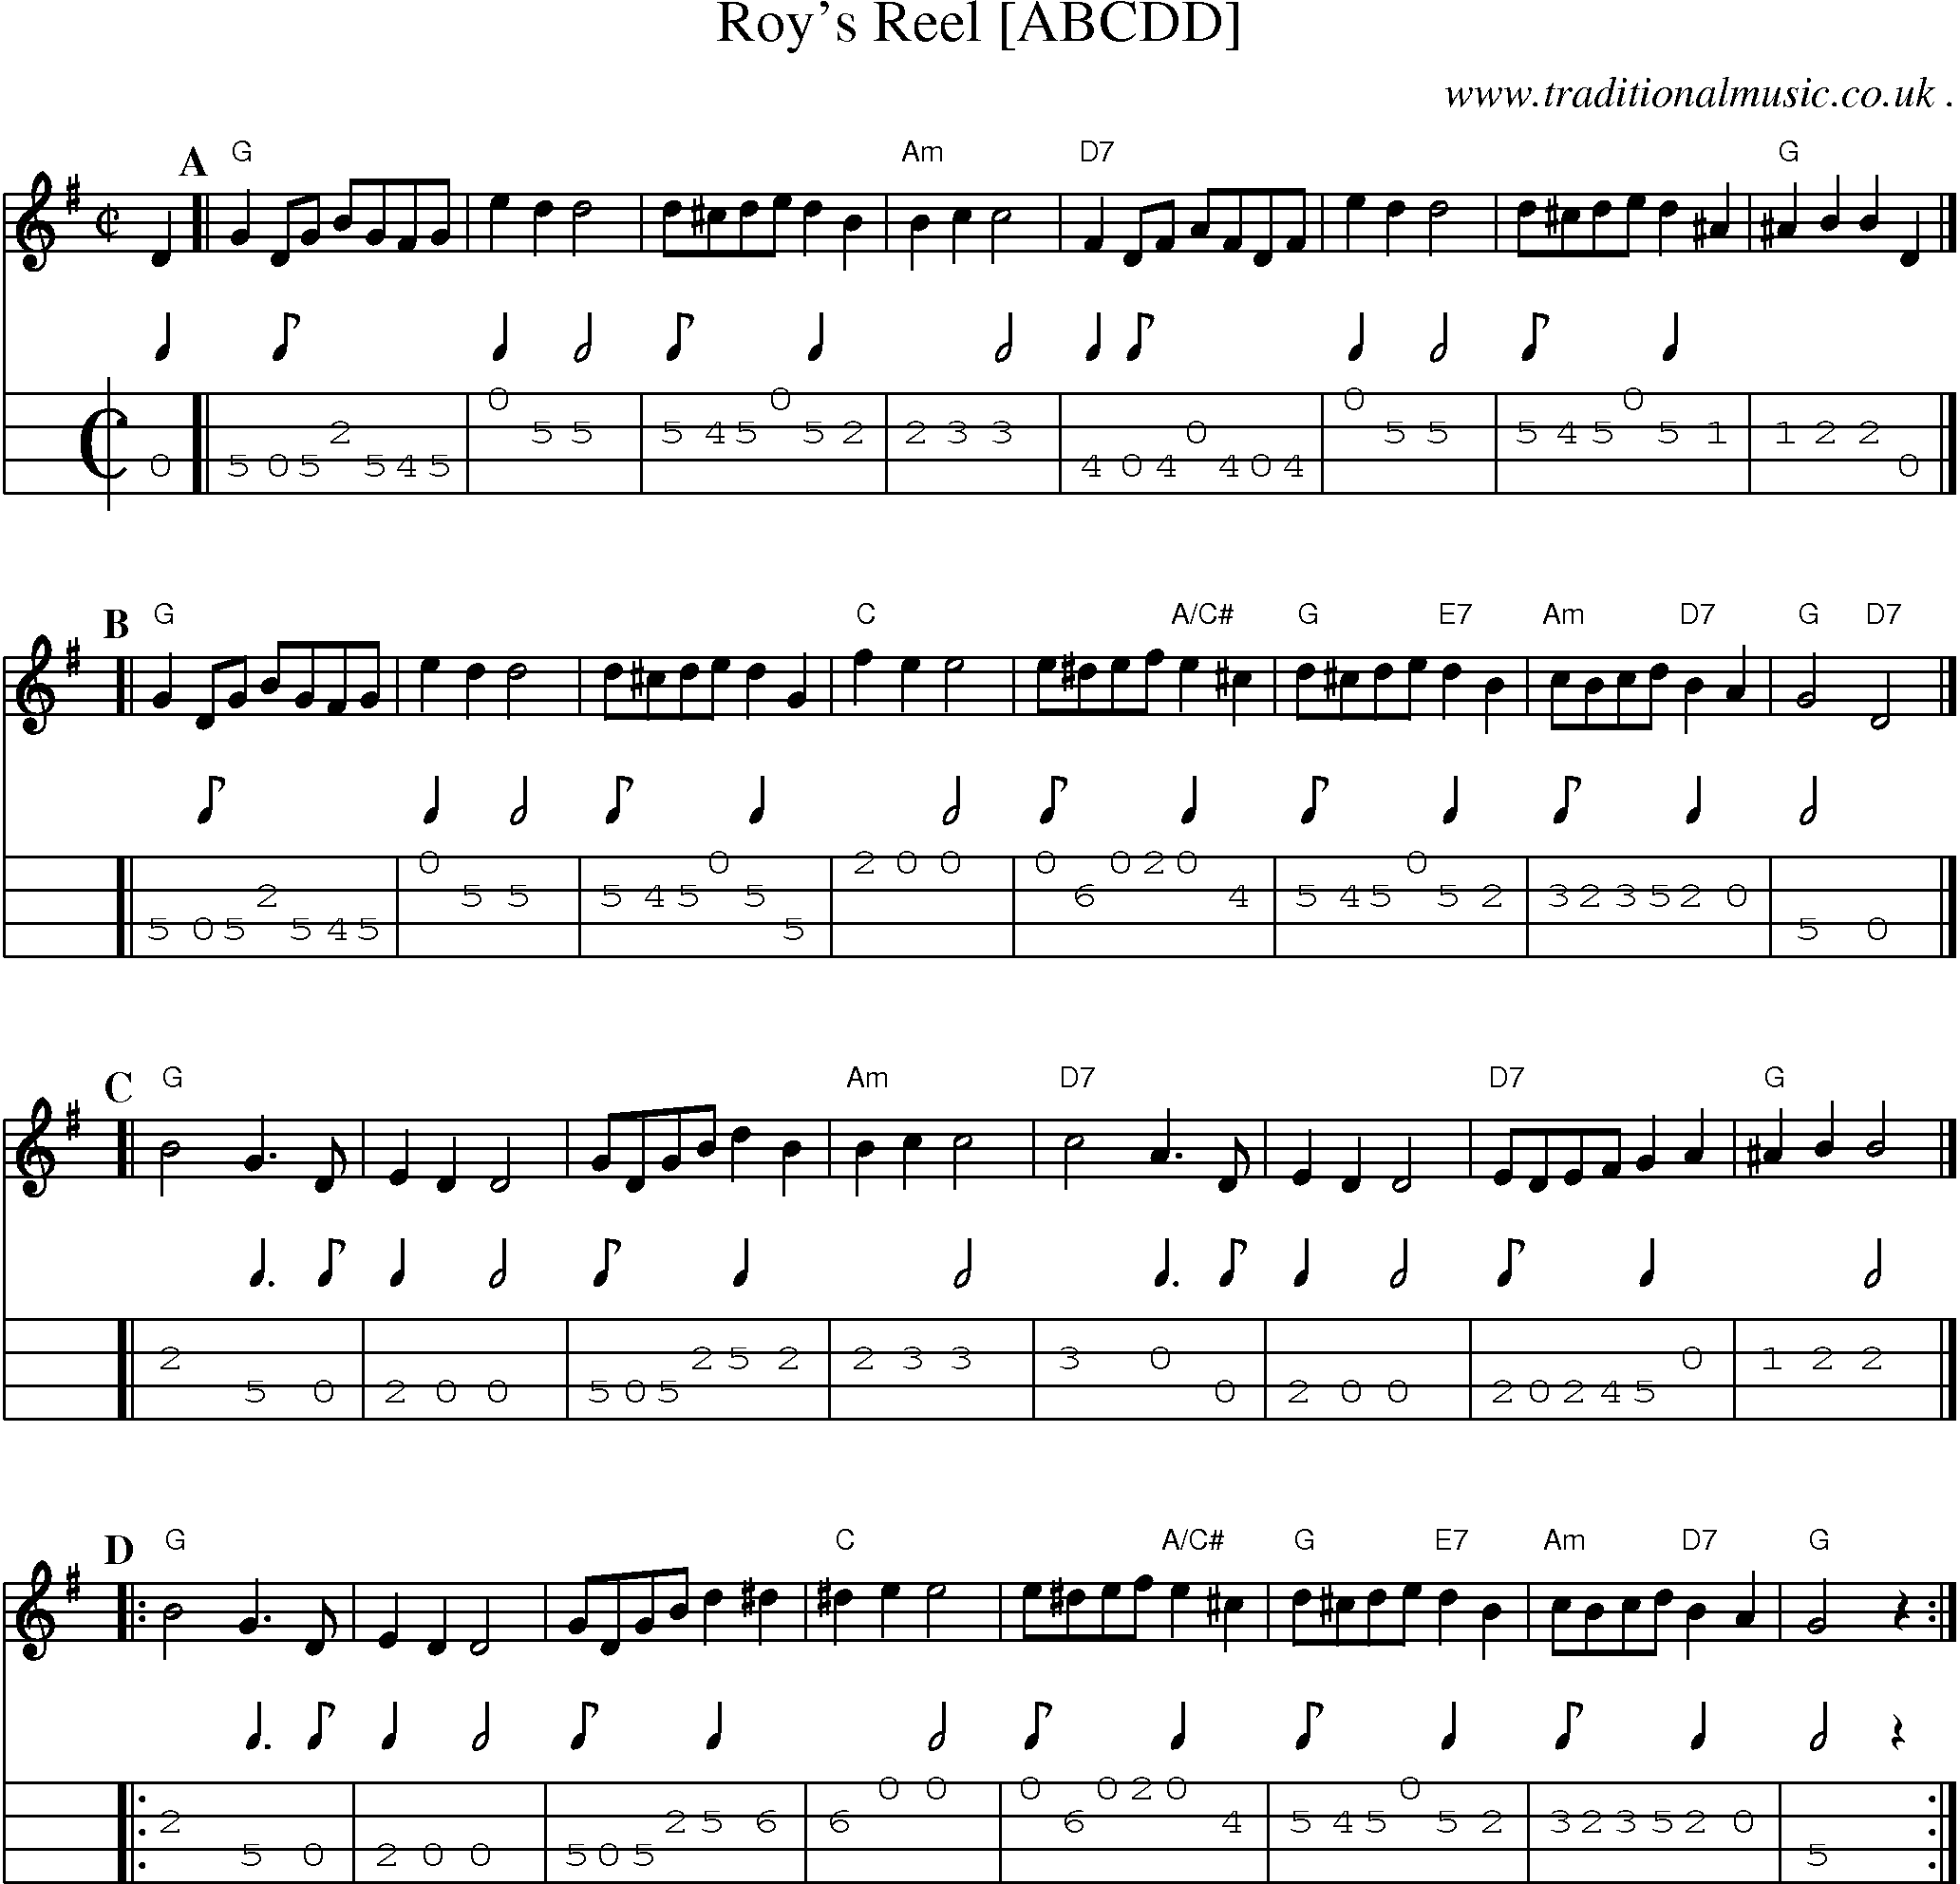 Sheet-music  score, Chords and Mandolin Tabs for Roys Reel [abcdd]